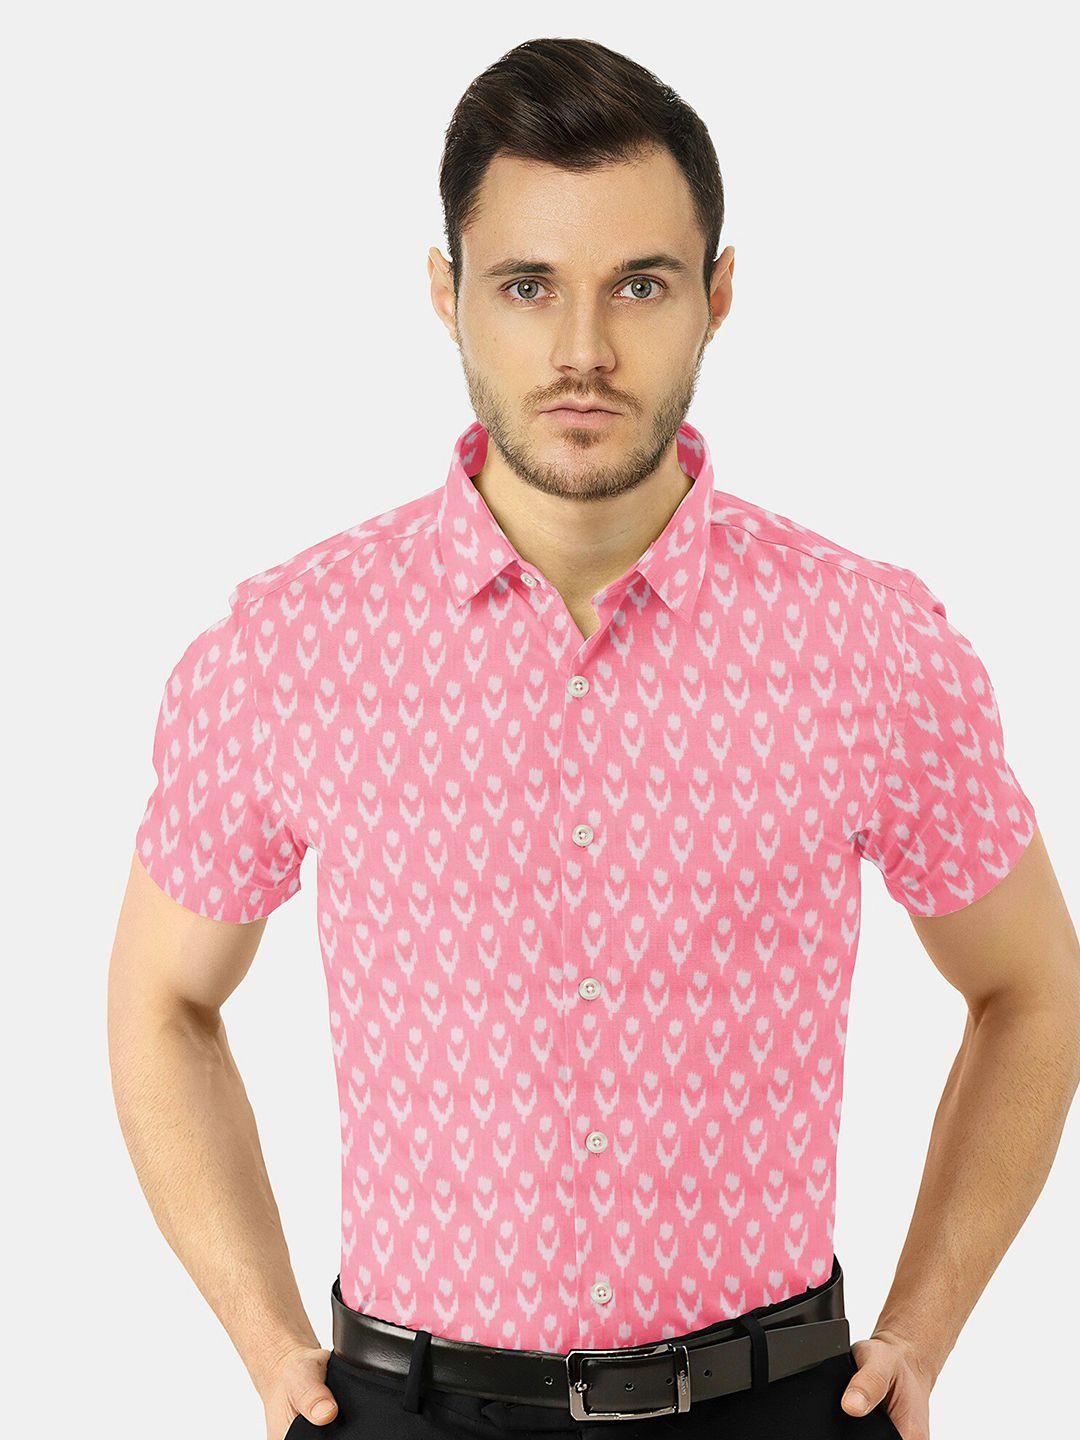 misbis relaxed slim fit floral opaque printed casual shirt